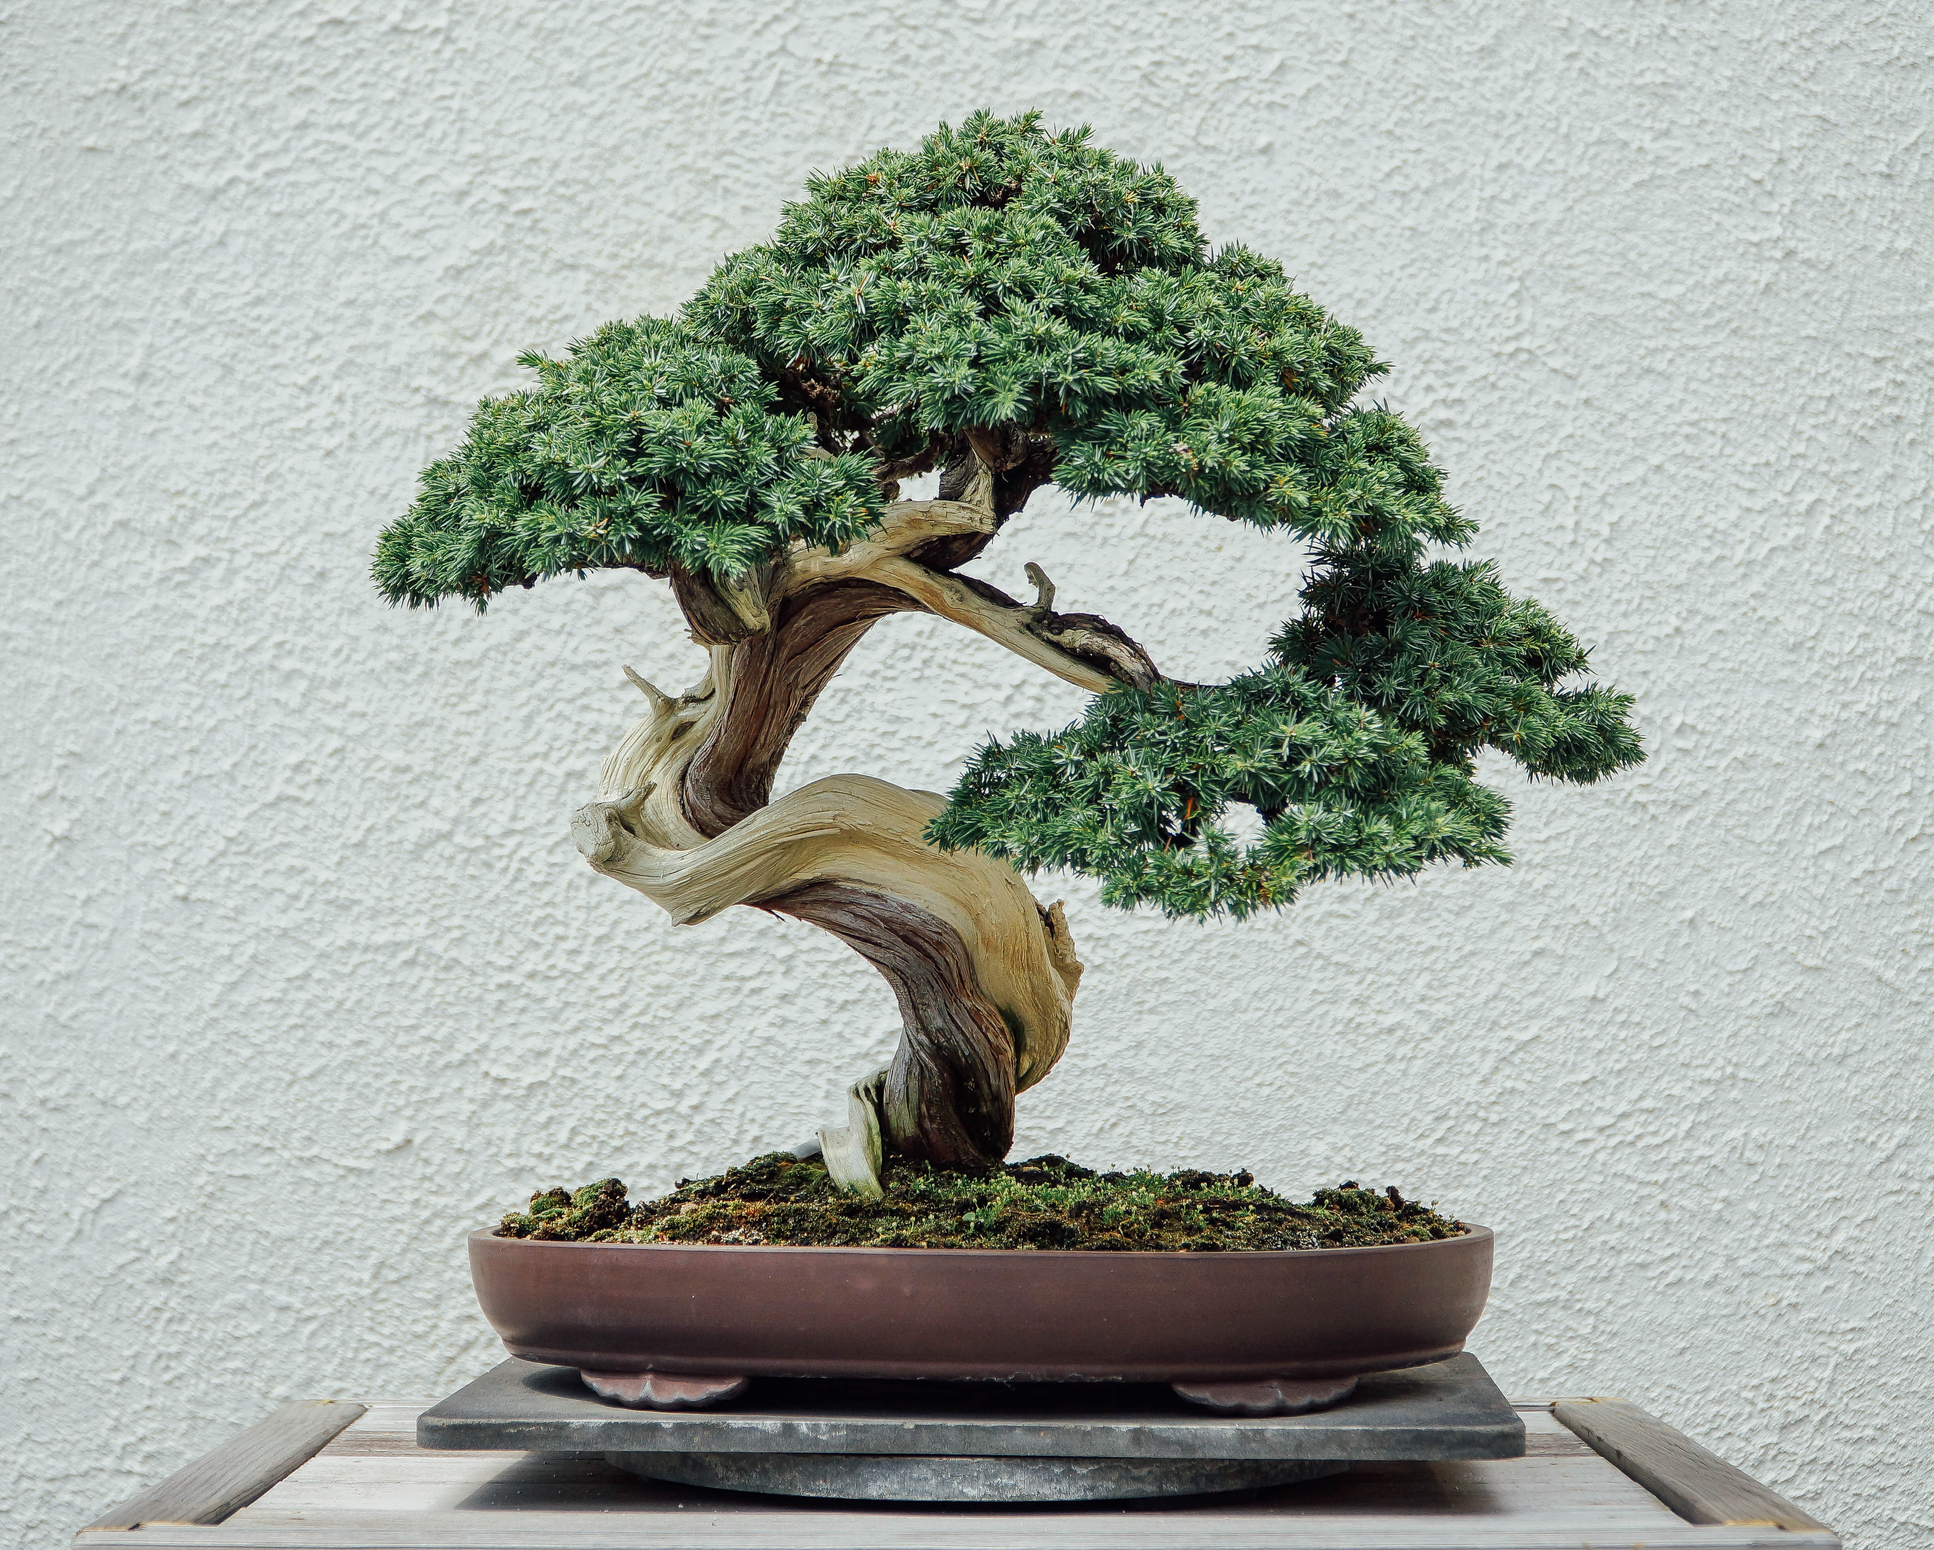 400-year-old bonsai tree worth $120K stolen, owners beg thieves to